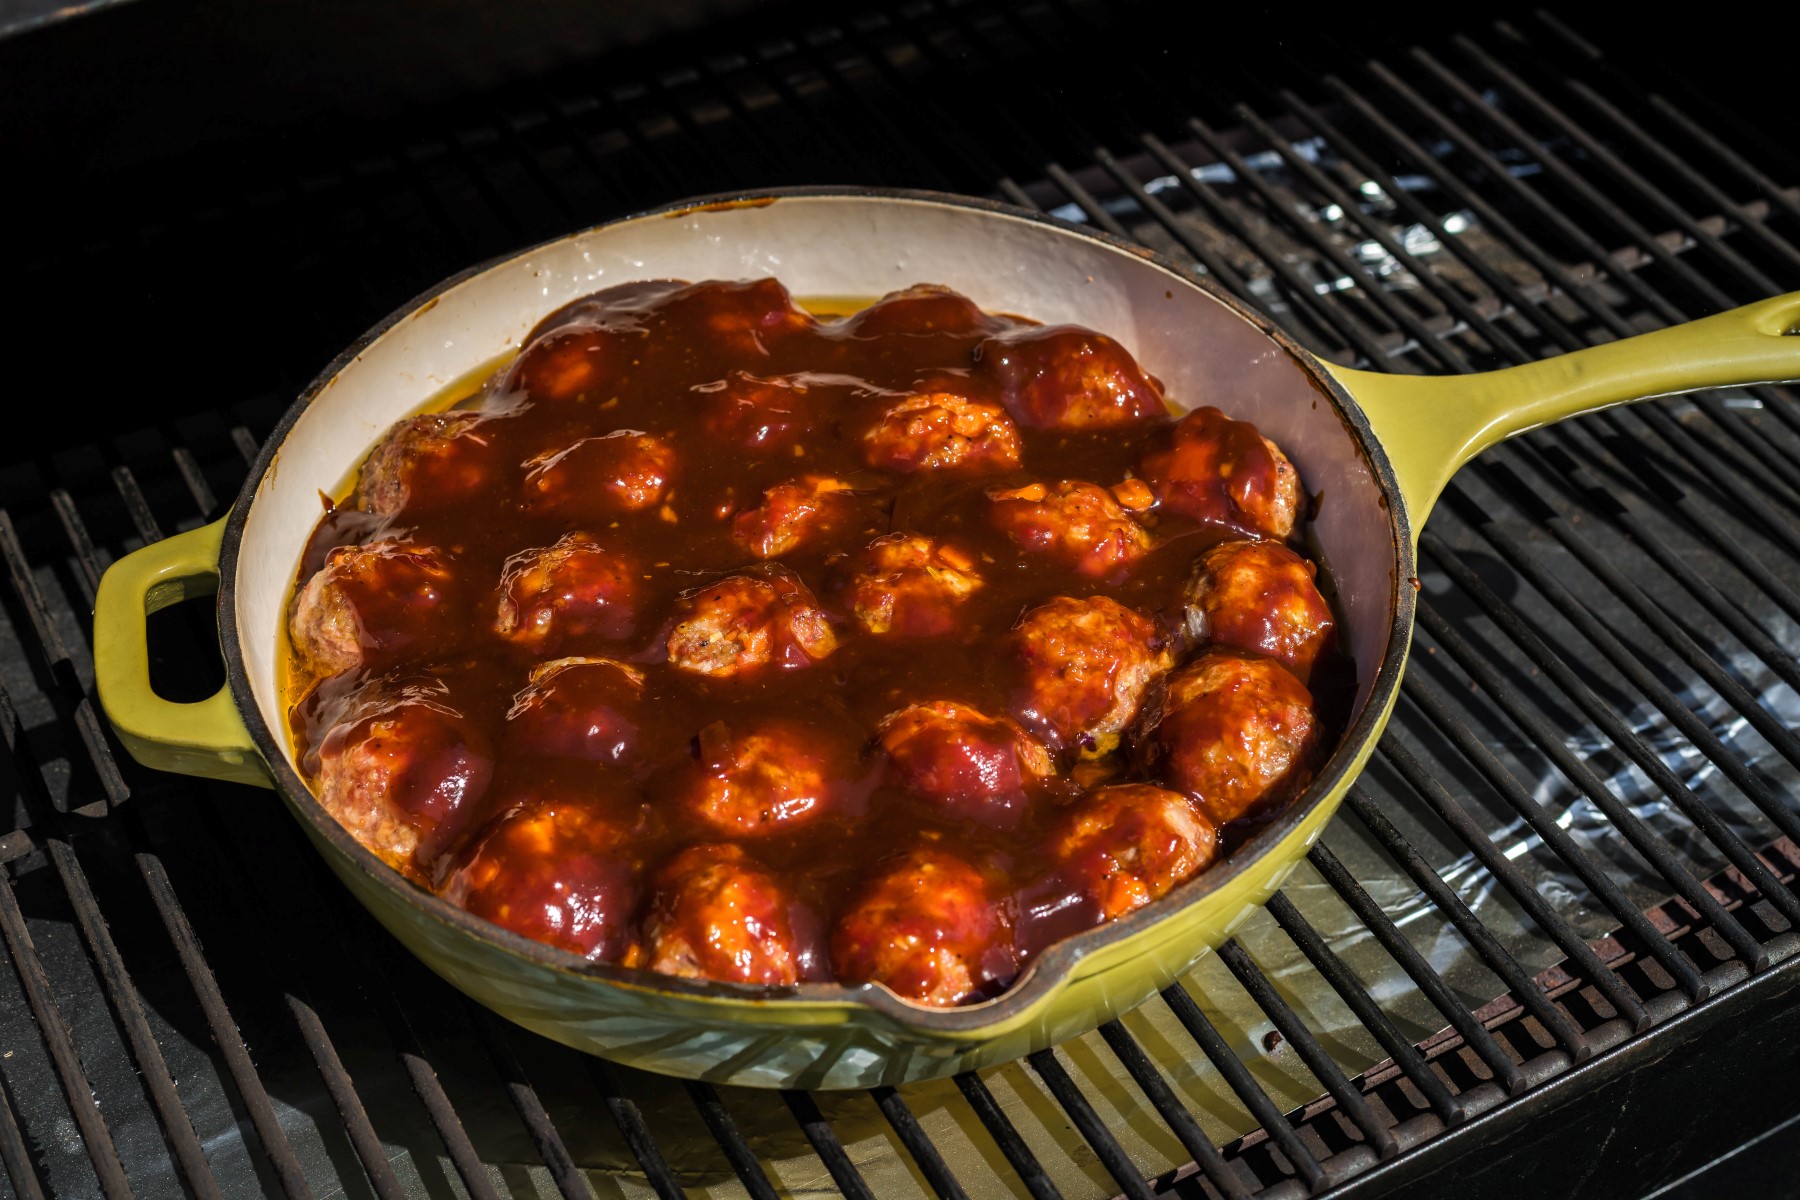 Meatballs covered in sauce in a cast iron skillet on the smoker grill.